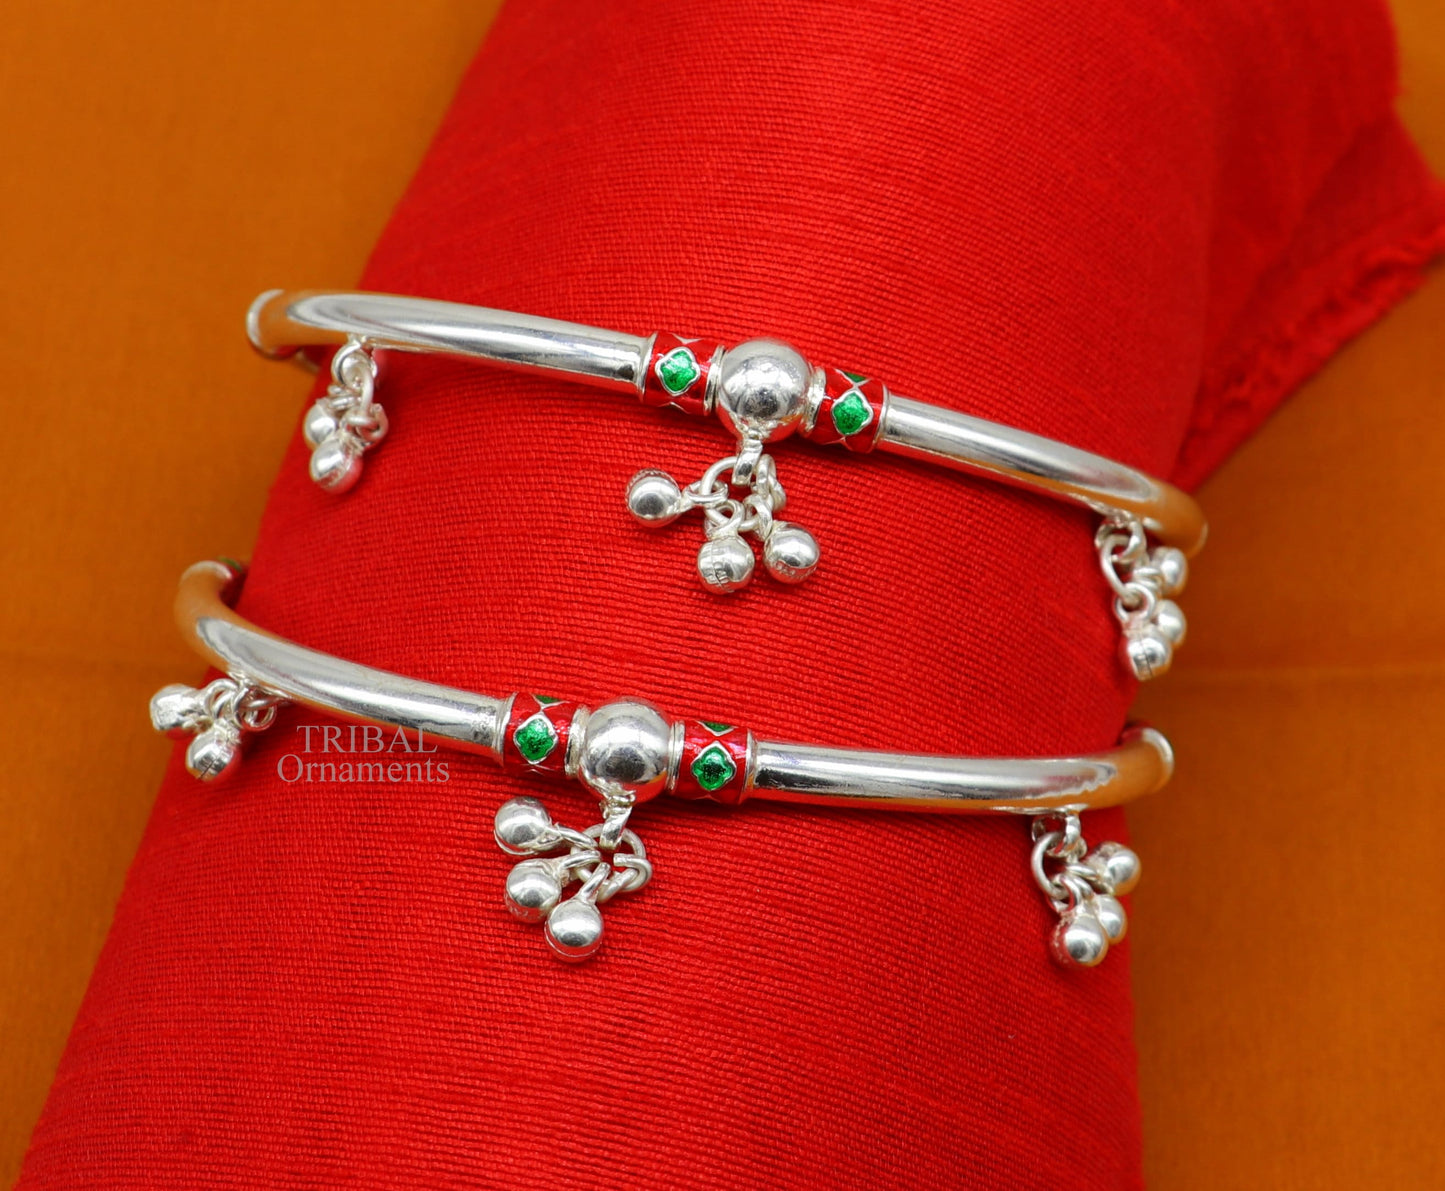 925 sterling silver handmade amazing foot ankle plain bracelet kada with hanging noisy bells, belly dance jewelry from Rajasthan nsfk59 - TRIBAL ORNAMENTS